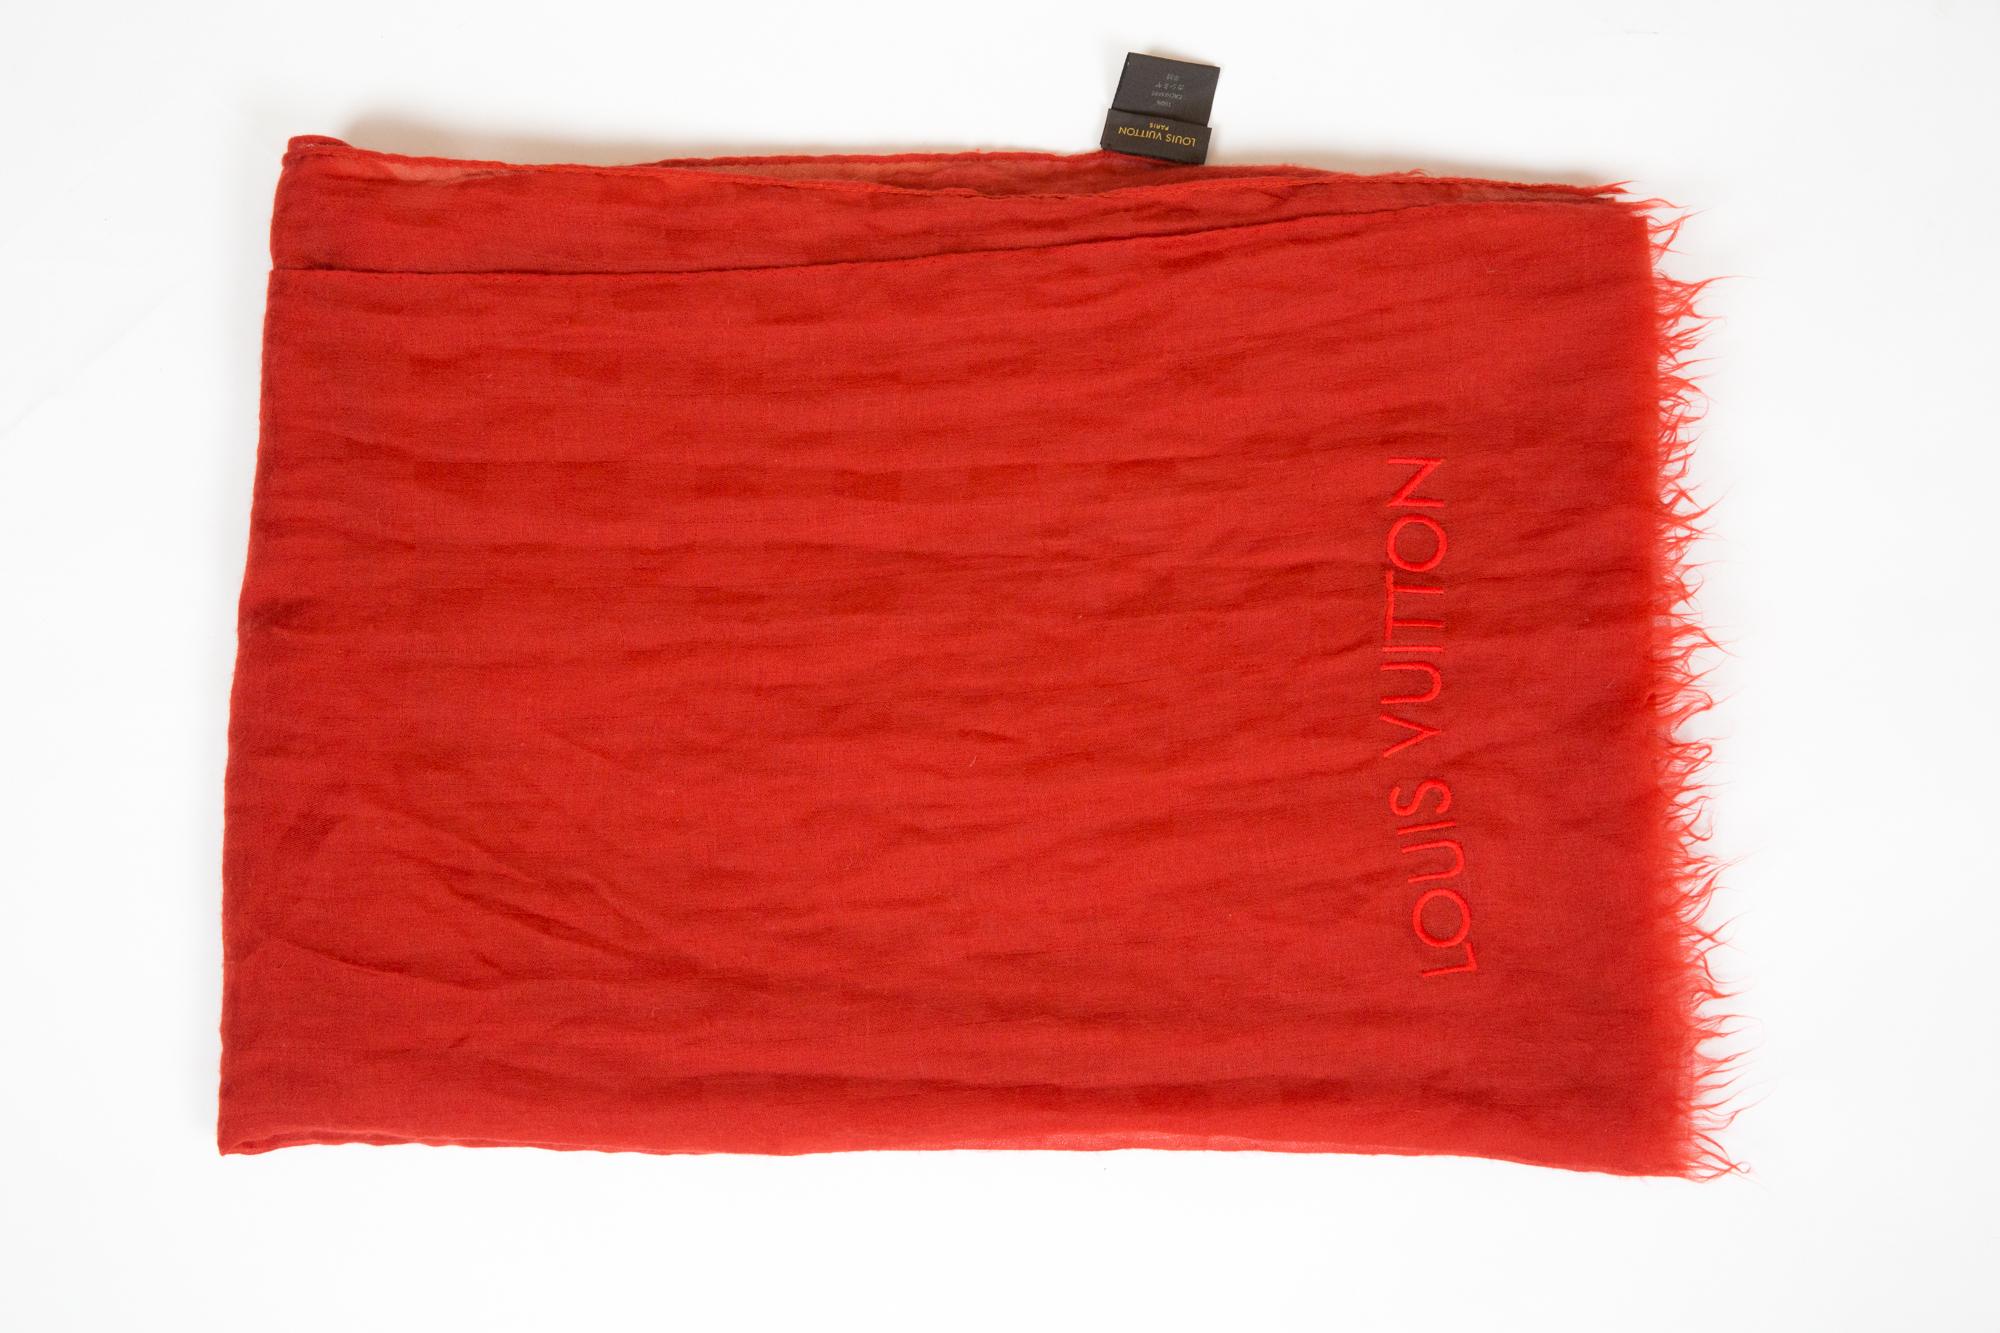 Louis Vuitton 100% cashmere orange shawl featuring a logo-embroidery, an all-over Damier jacquard pattern, frayed hem.
In excellent vintage condition. Made in France.
55.1 in. (140 cm)  X 82.7in (210cm)
We guarantee you will receive this  iconic